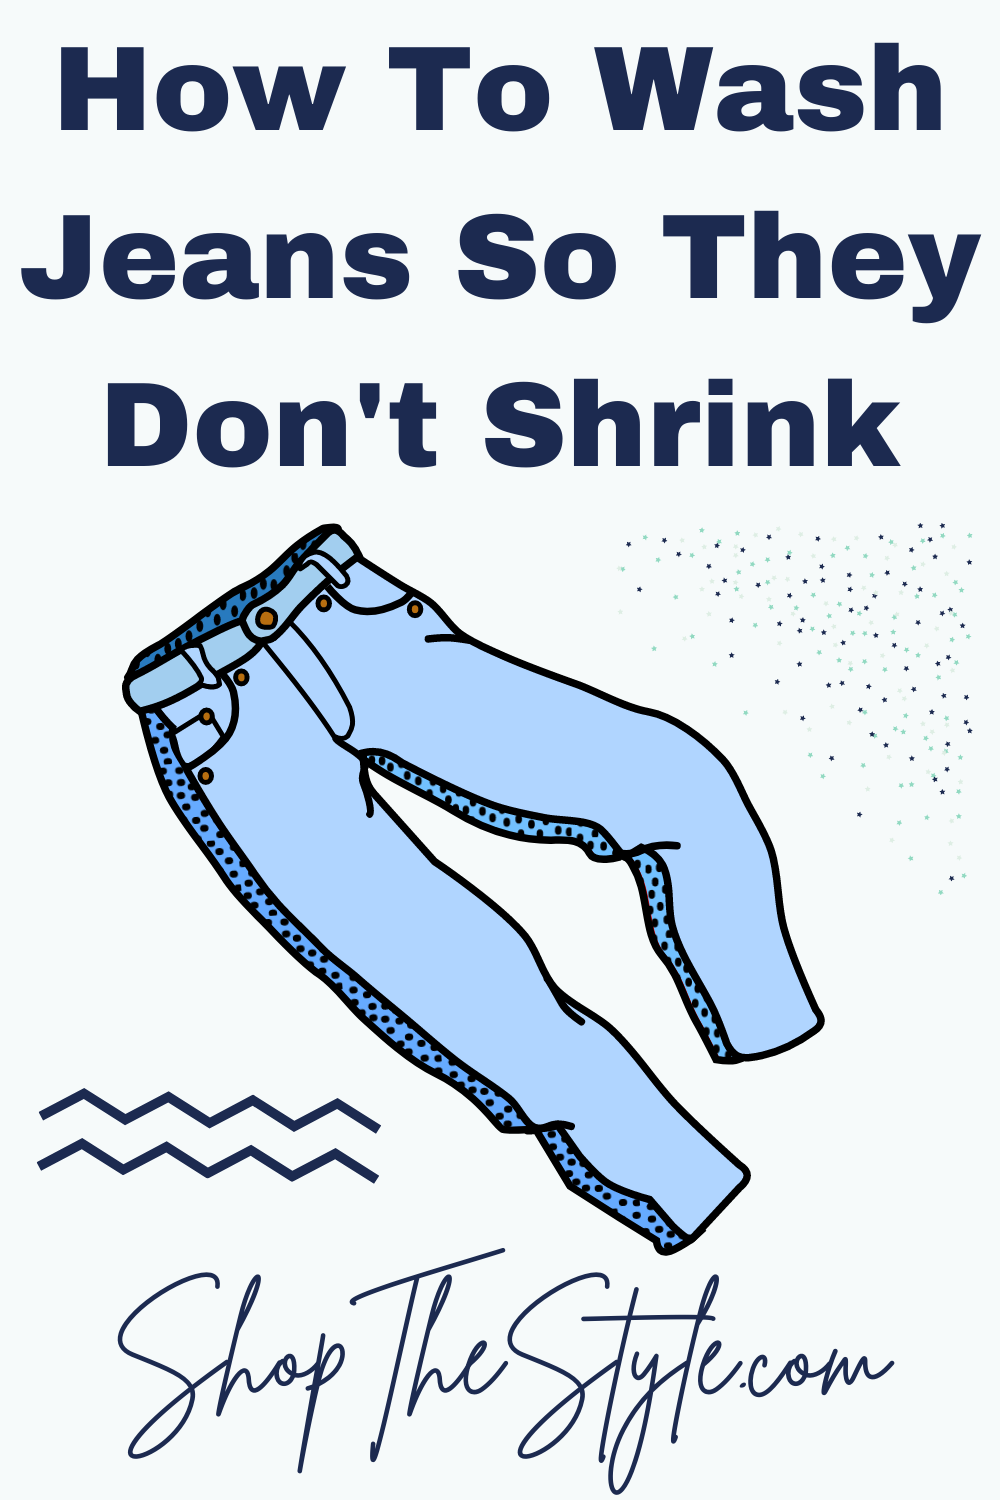 How To Wash Jeans To Avoid Shrinking